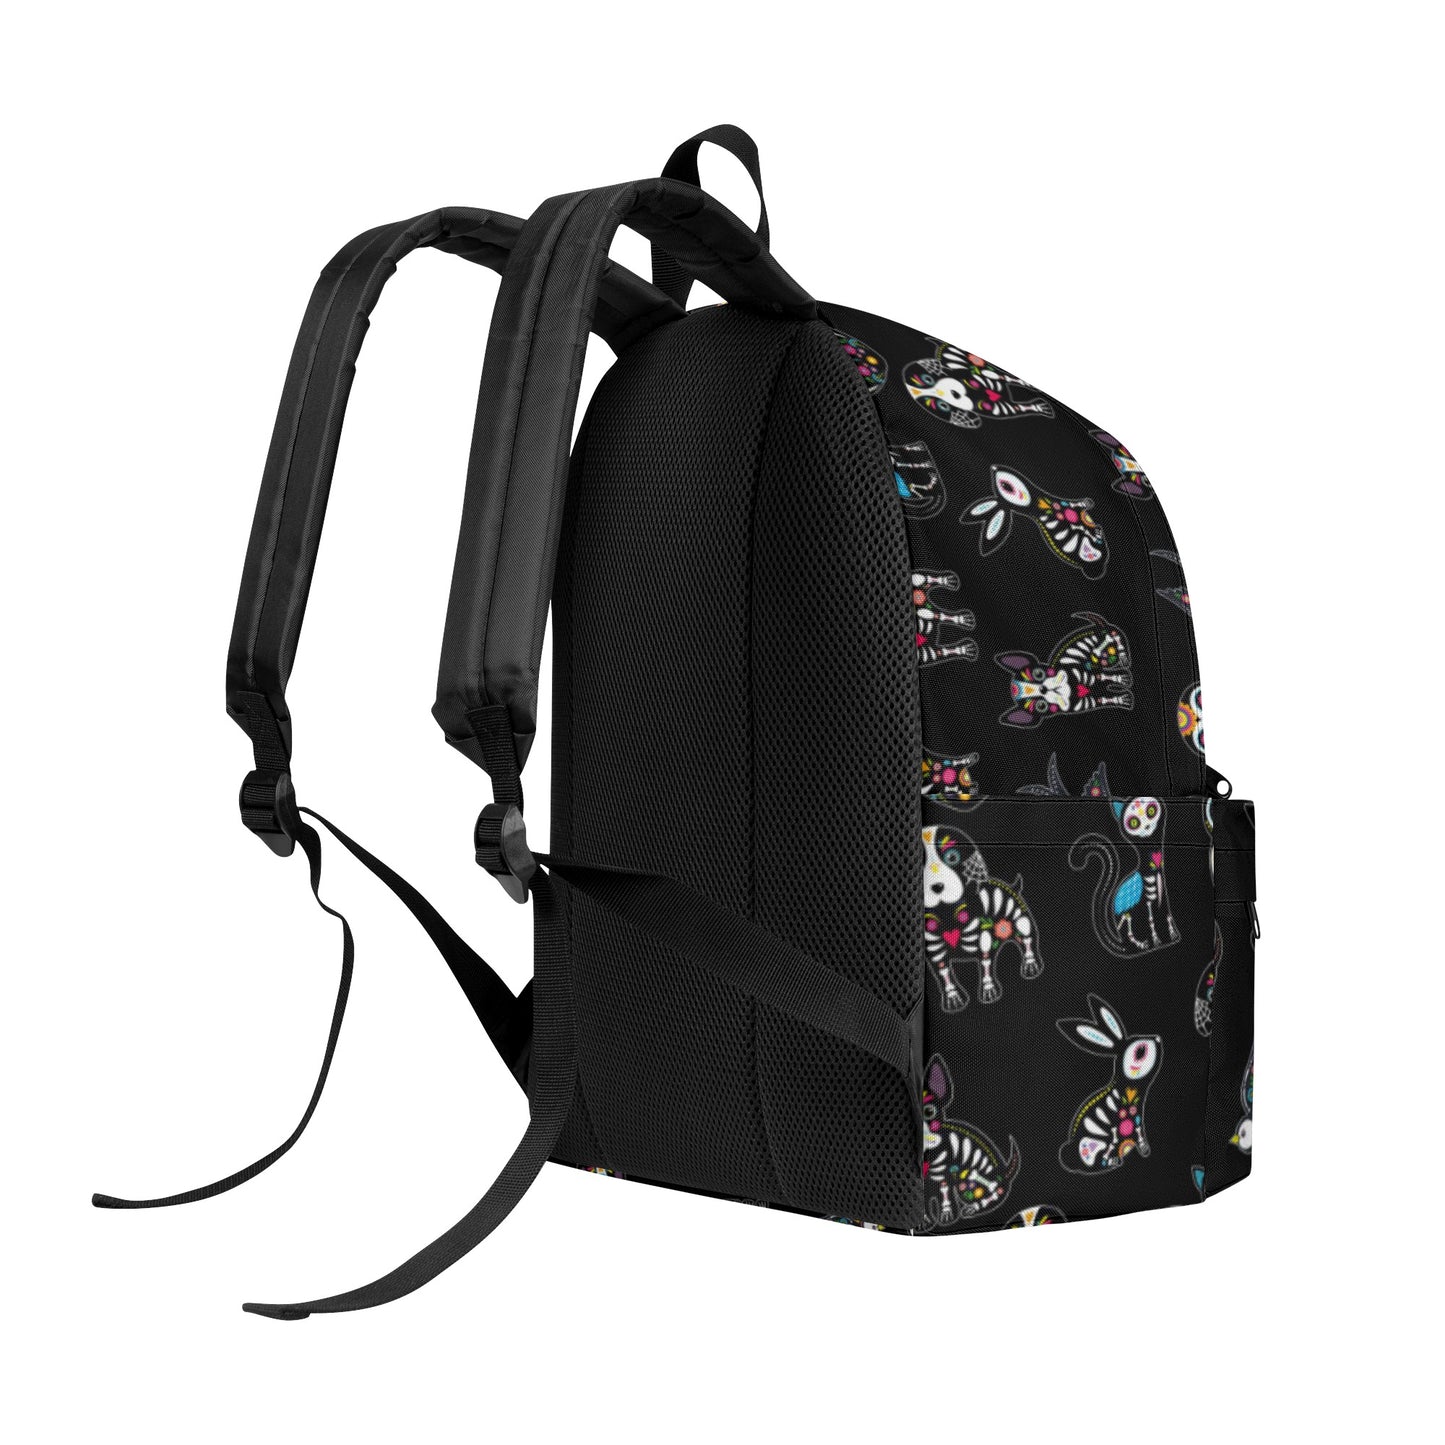 Animal sugar skull Day of the dead New Backpack